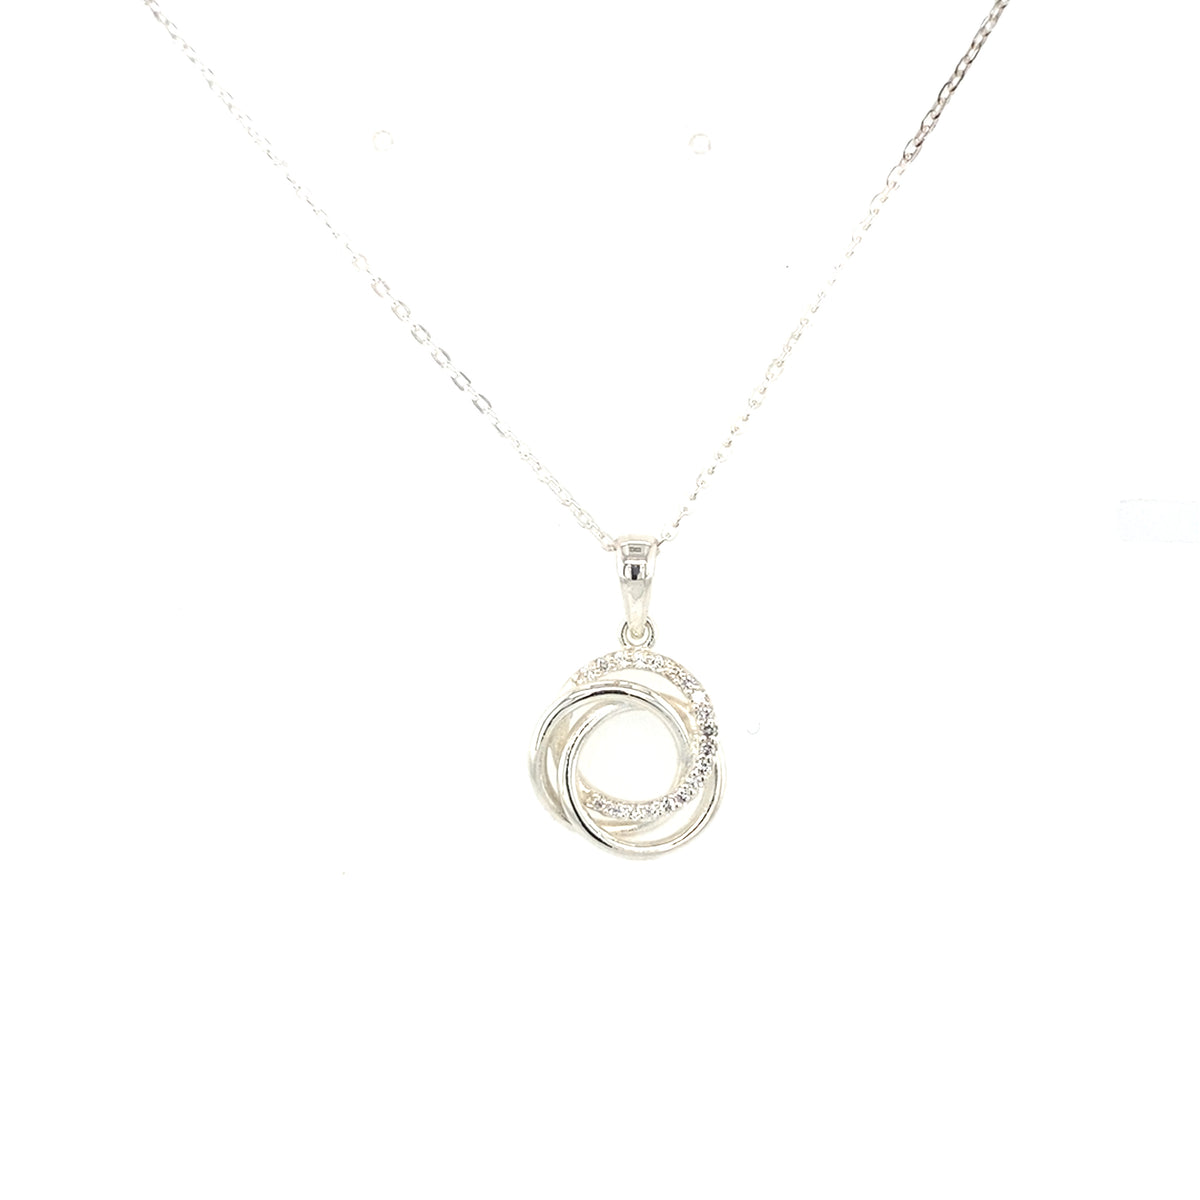 Sterling Silver Three Ring Pendant